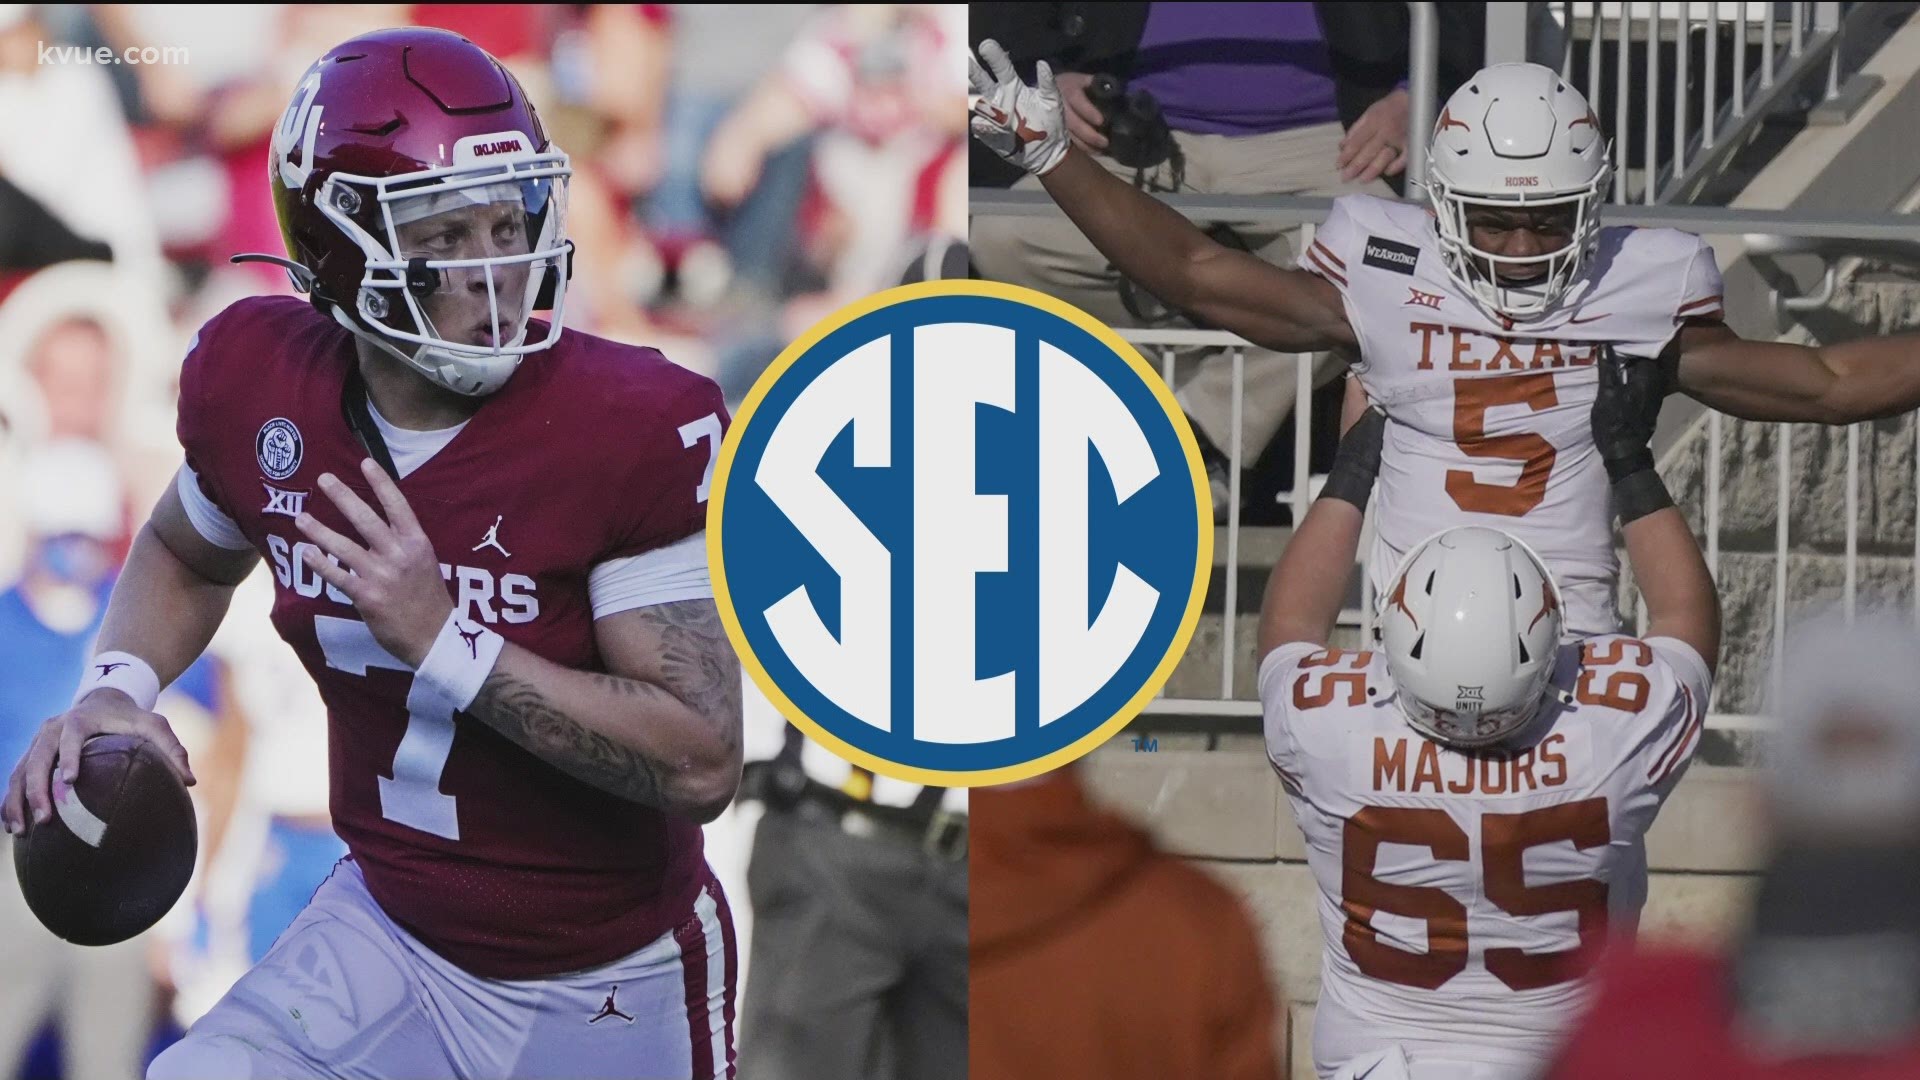 Reports suggest that Texas and Oklahoma may be exploring a jump to the southeastern conference.